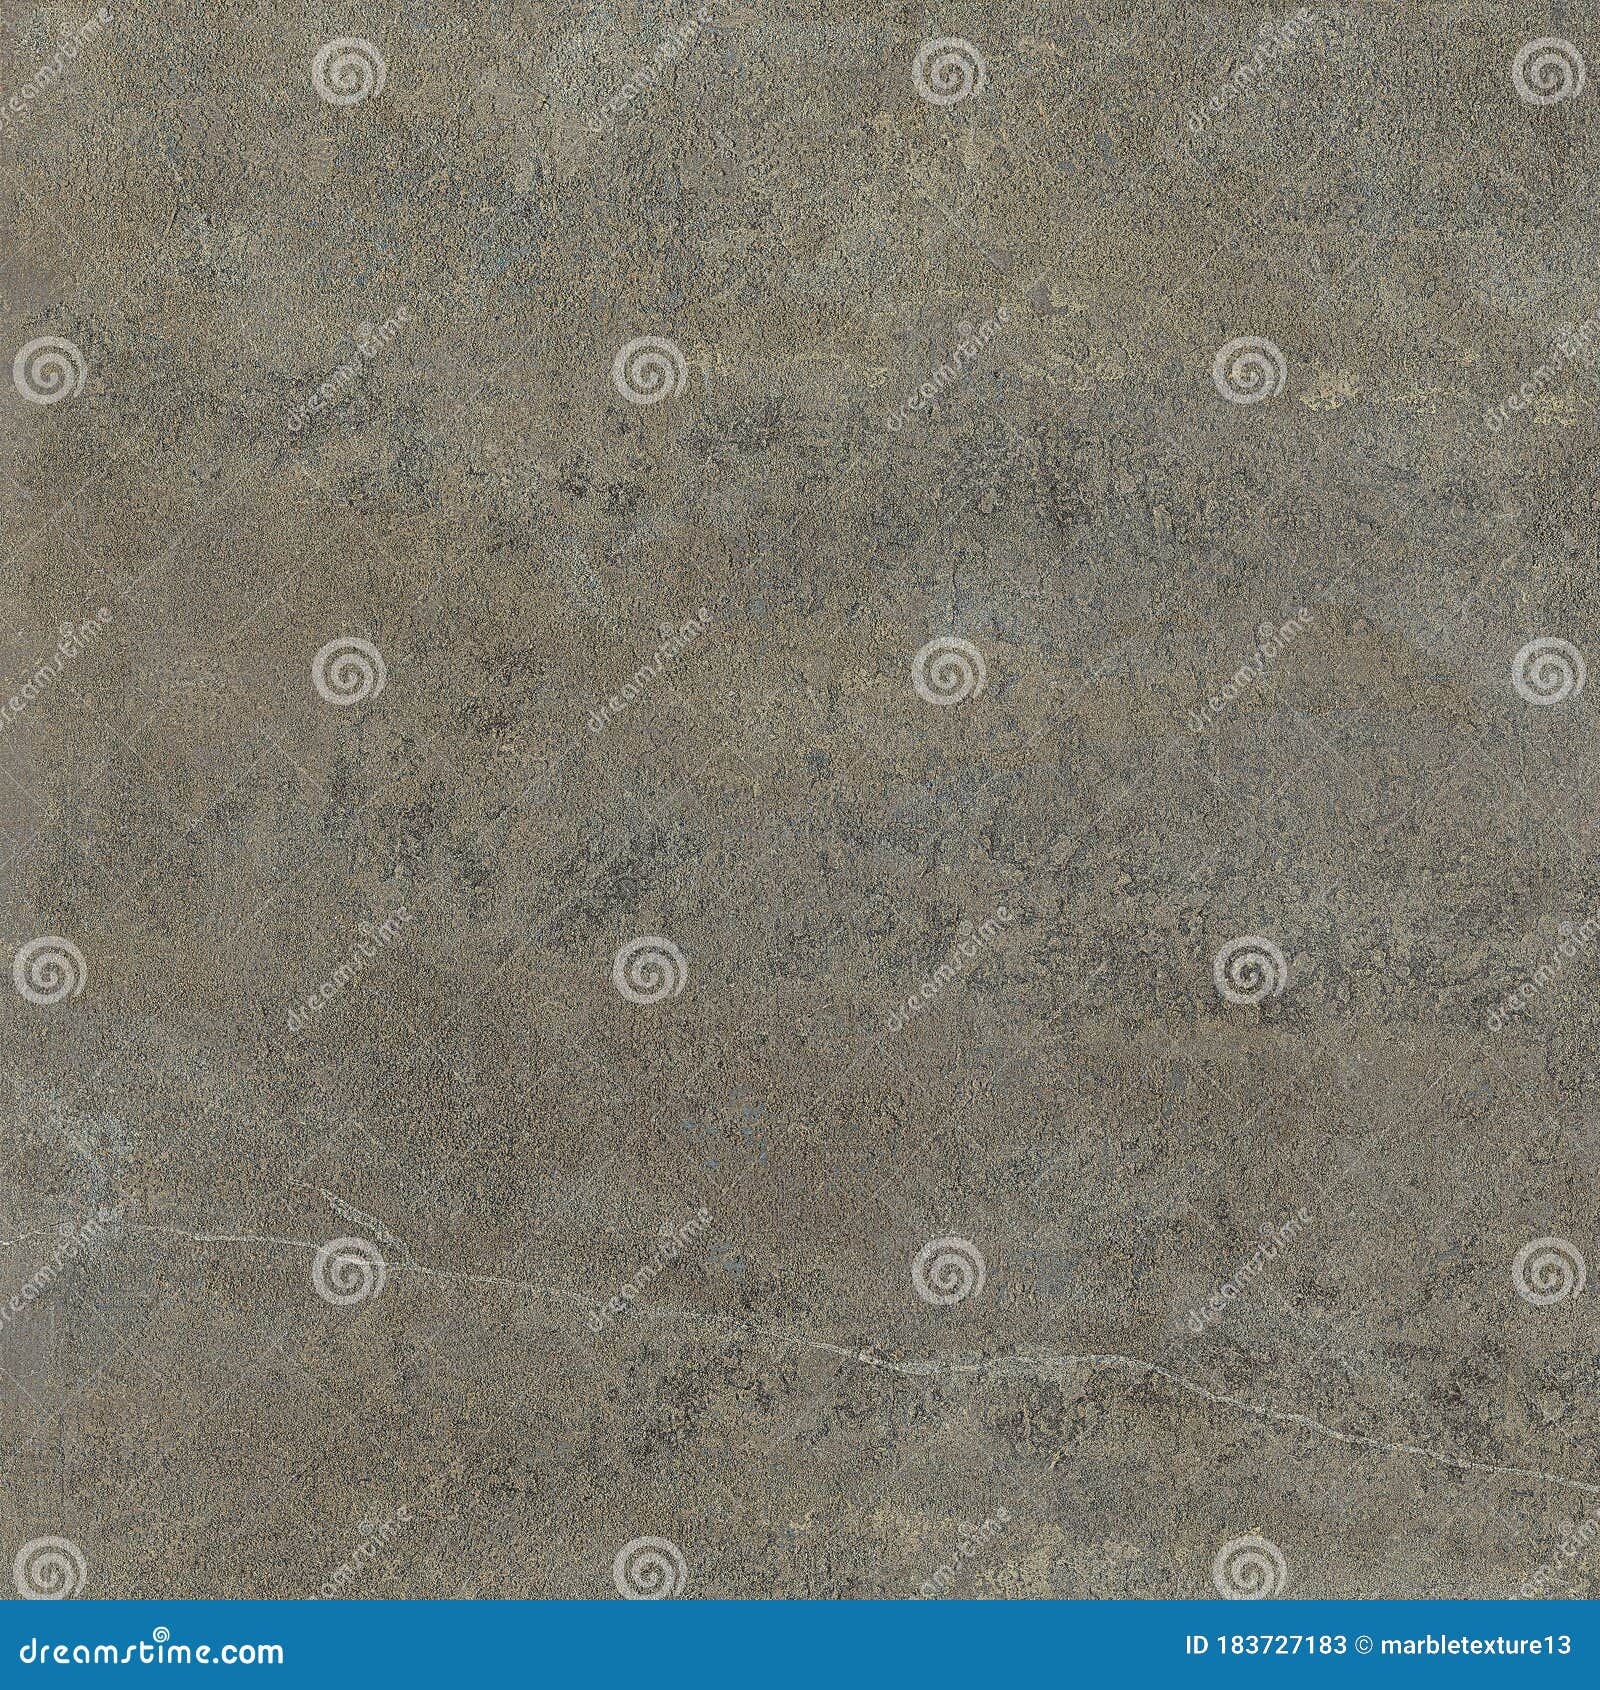 Marble Texture Background, Natural Breccia Marble Tiles for Ceramic ...